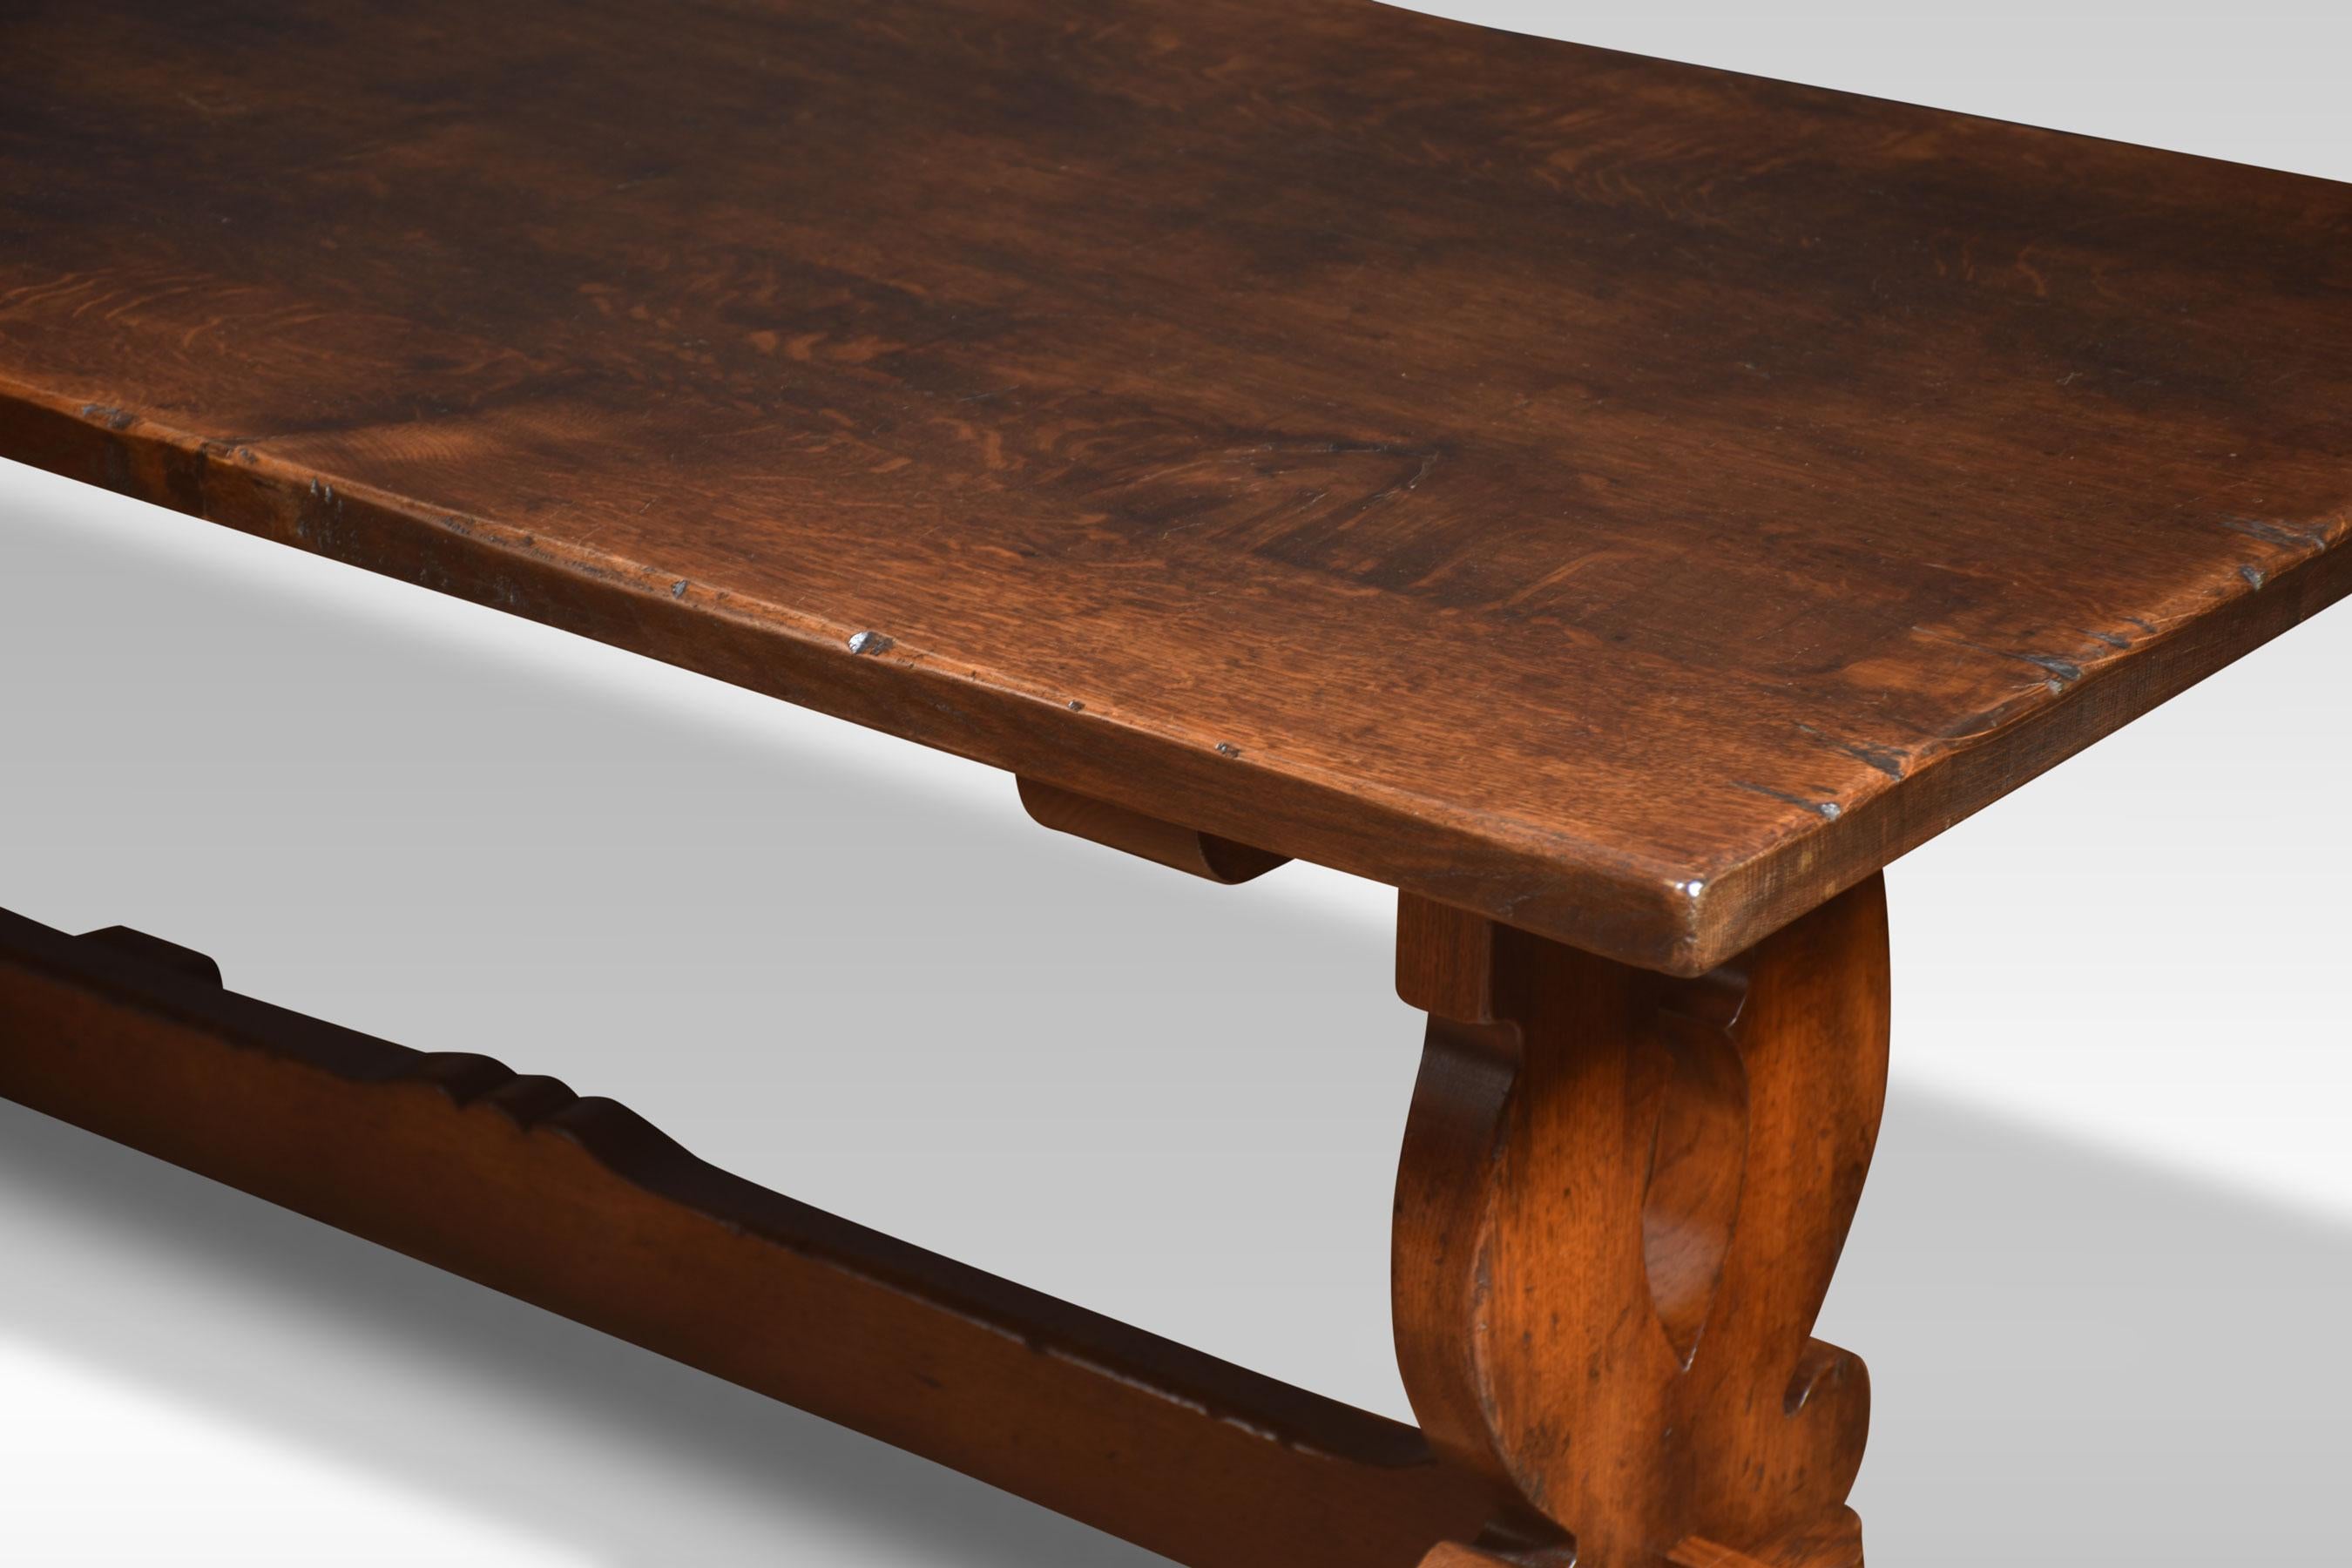 Large Oak refectory table, the plank top, raised on trestle ends united by stretcher.
Dimensions
Height 30 Inches
Width 72 Inches
Depth 33 Inches